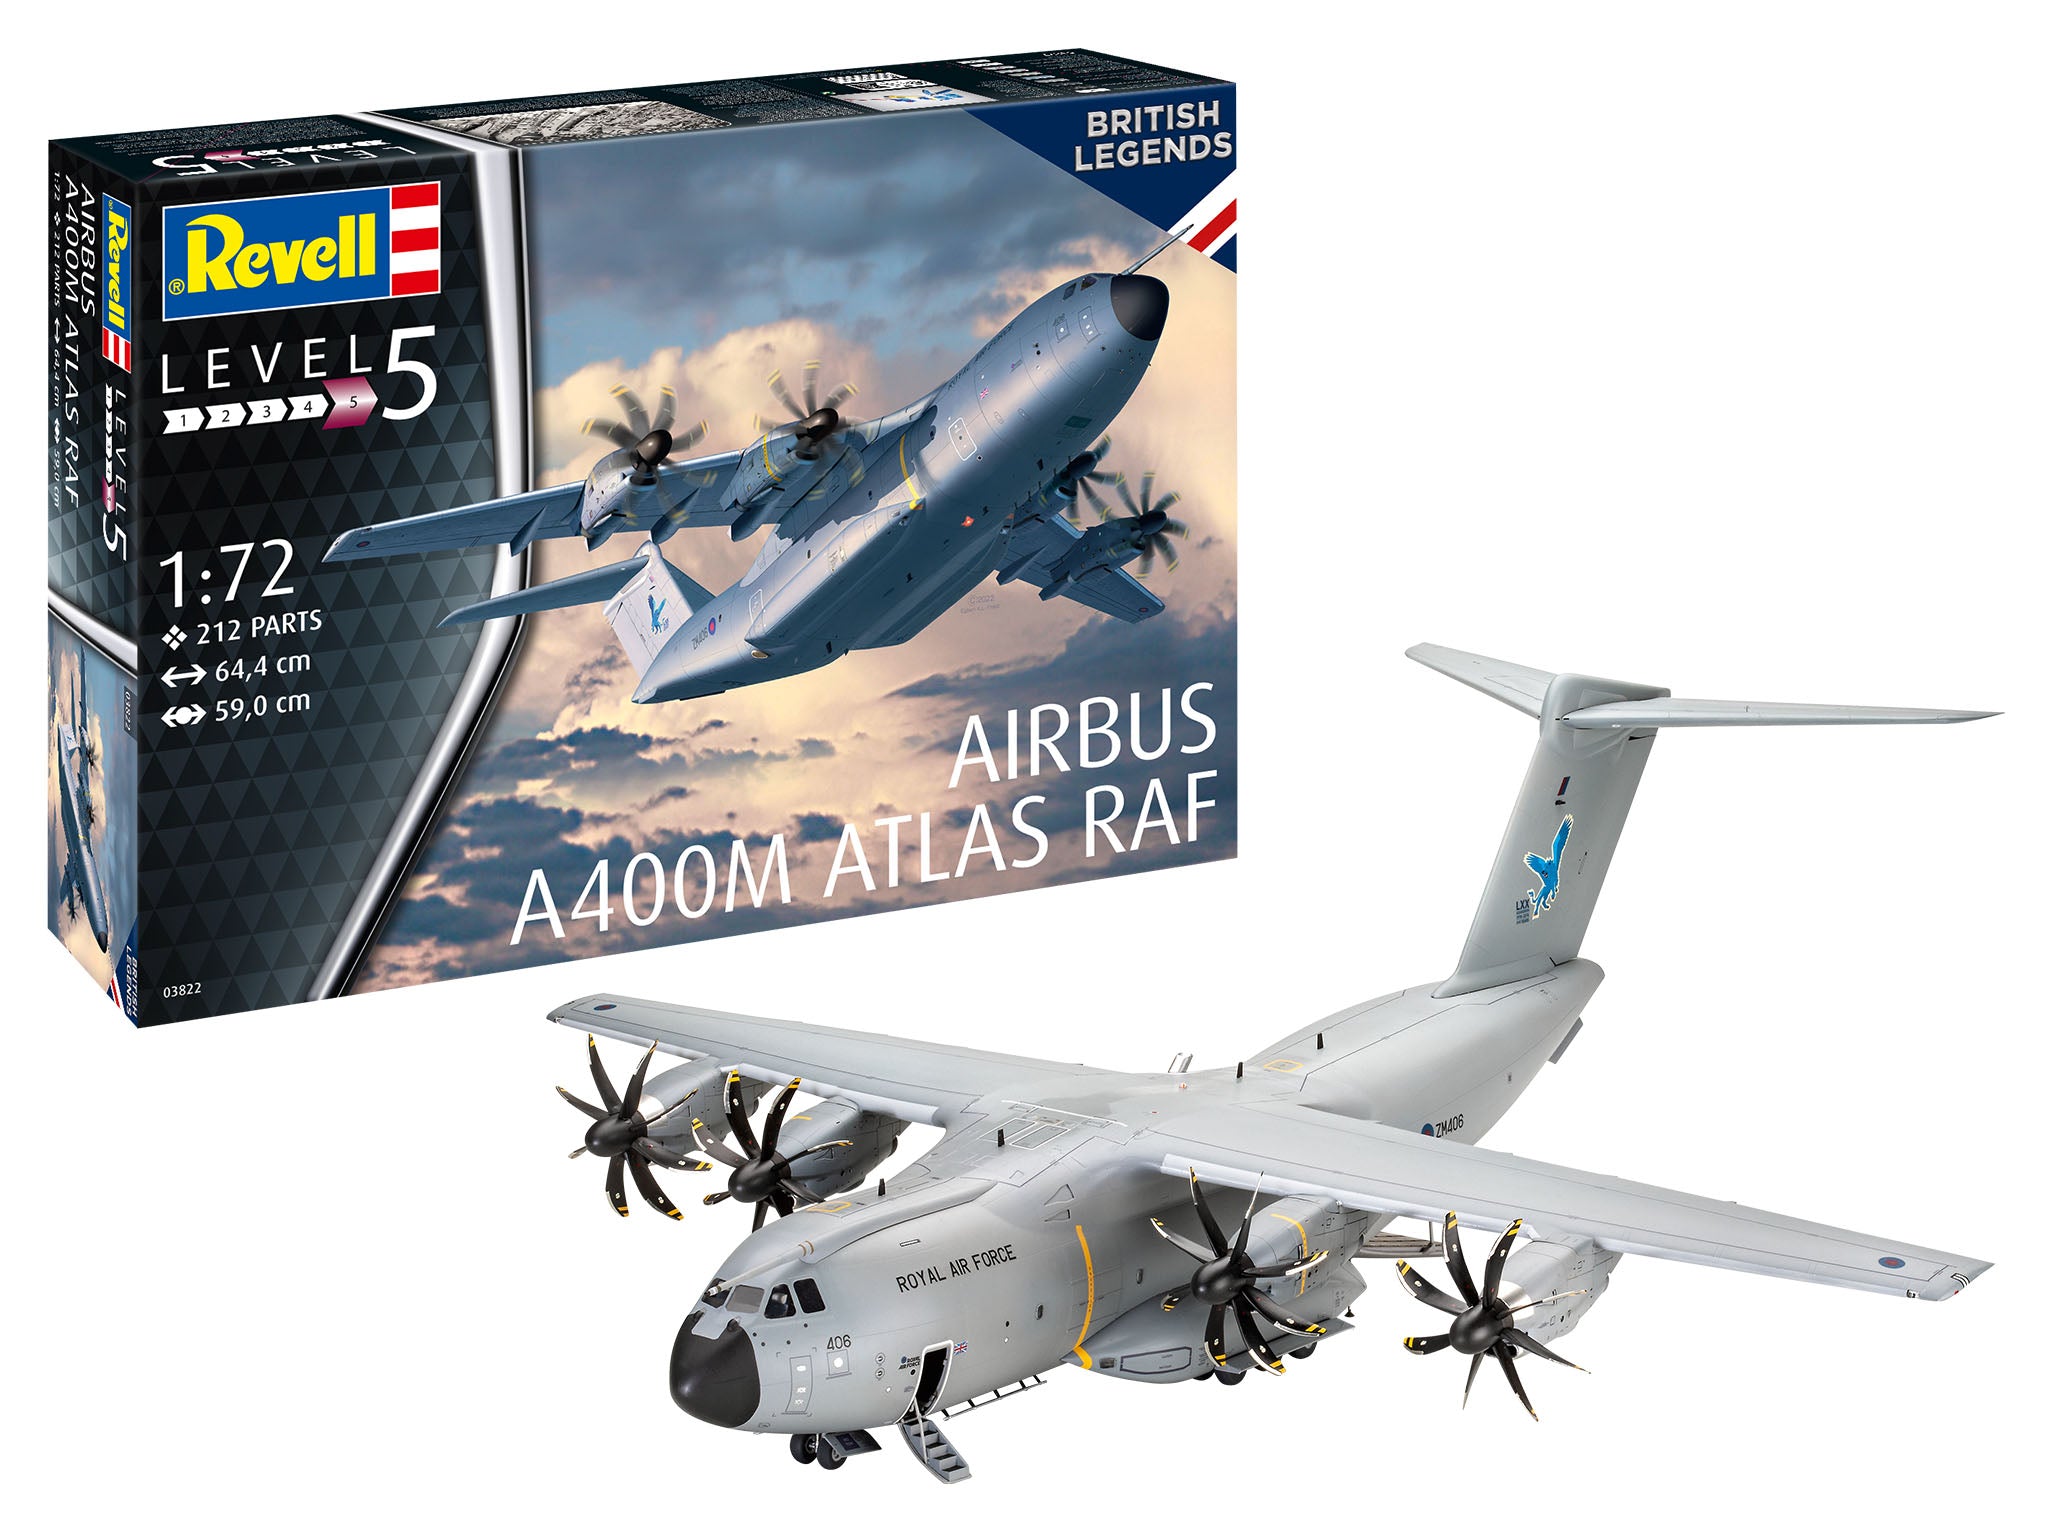 Revell Airbus A400M Atlas "RAF“ 1:72 - Loaded Dice